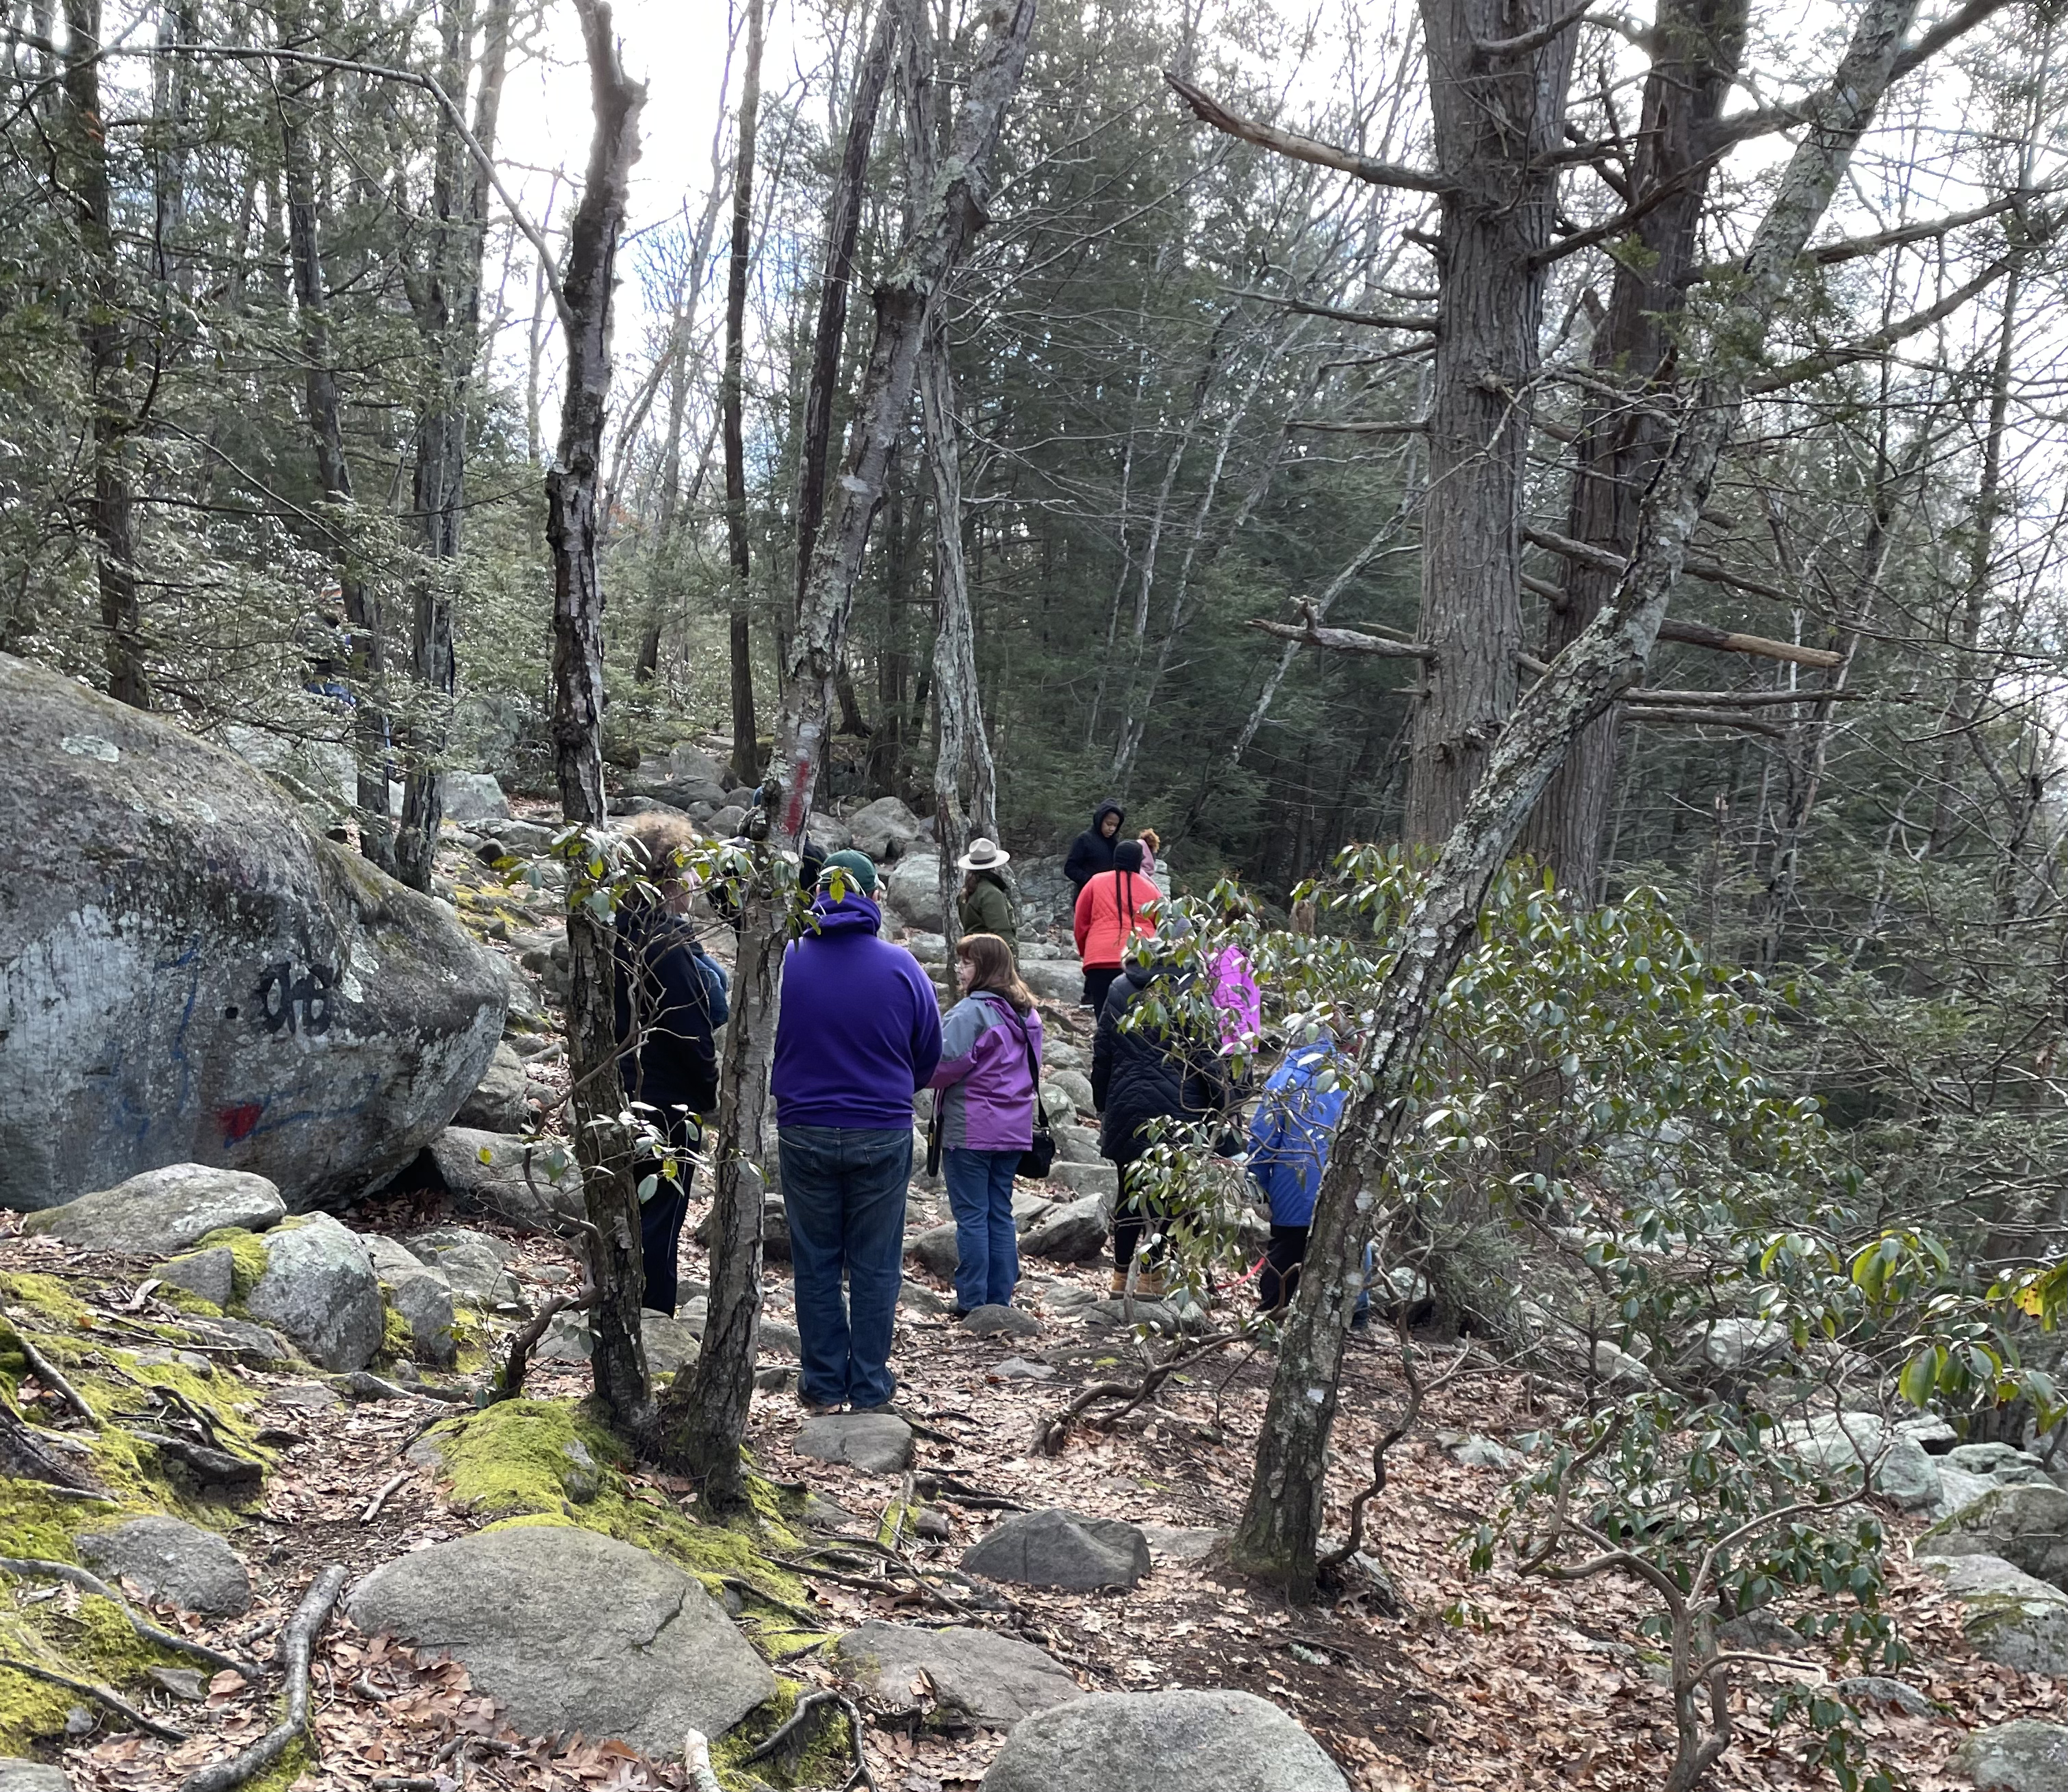 An NPS ranger with a group of visitors on a hike in the woods